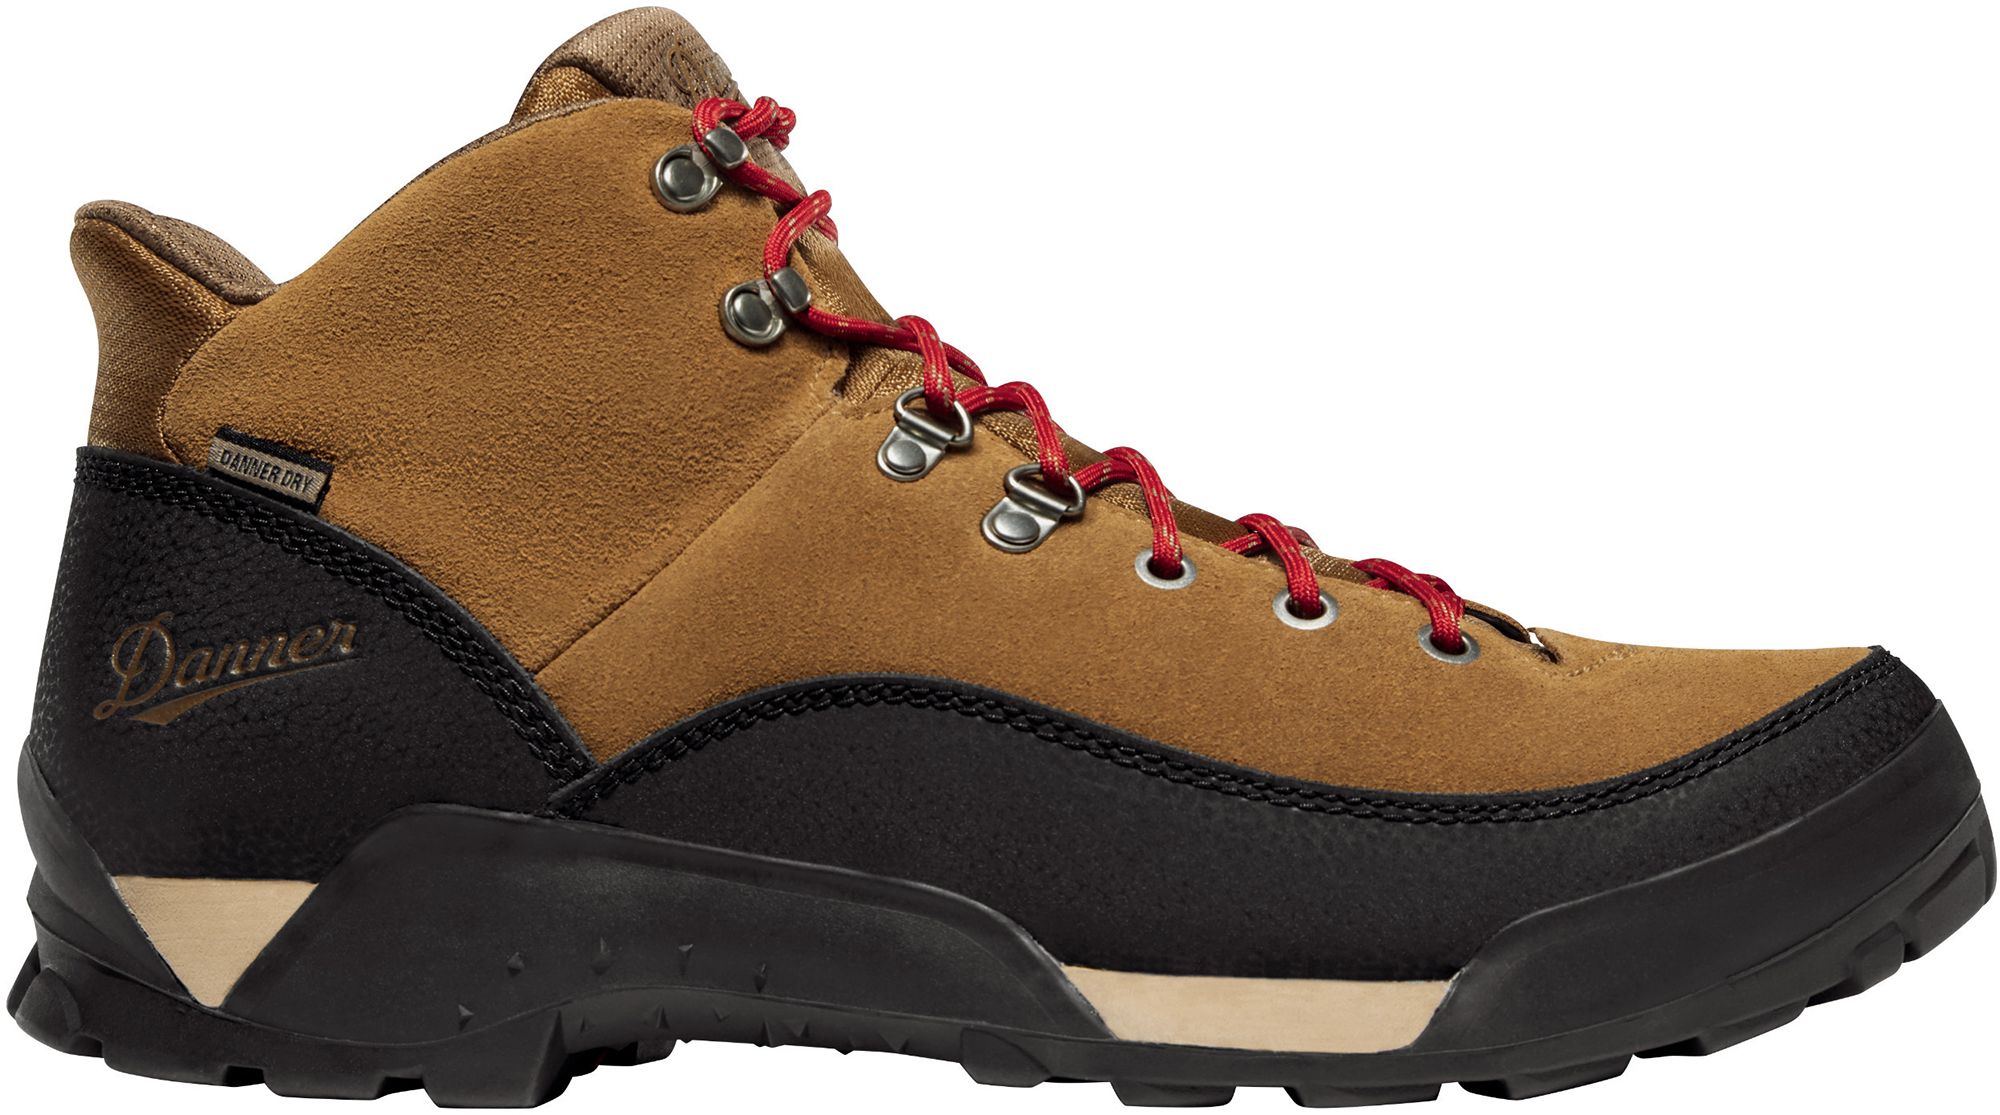 Photos - Trekking Shoes Danner Men's Panorama 6" Waterproof Hiking Boots, Size 10.5, Brown/Red | F 